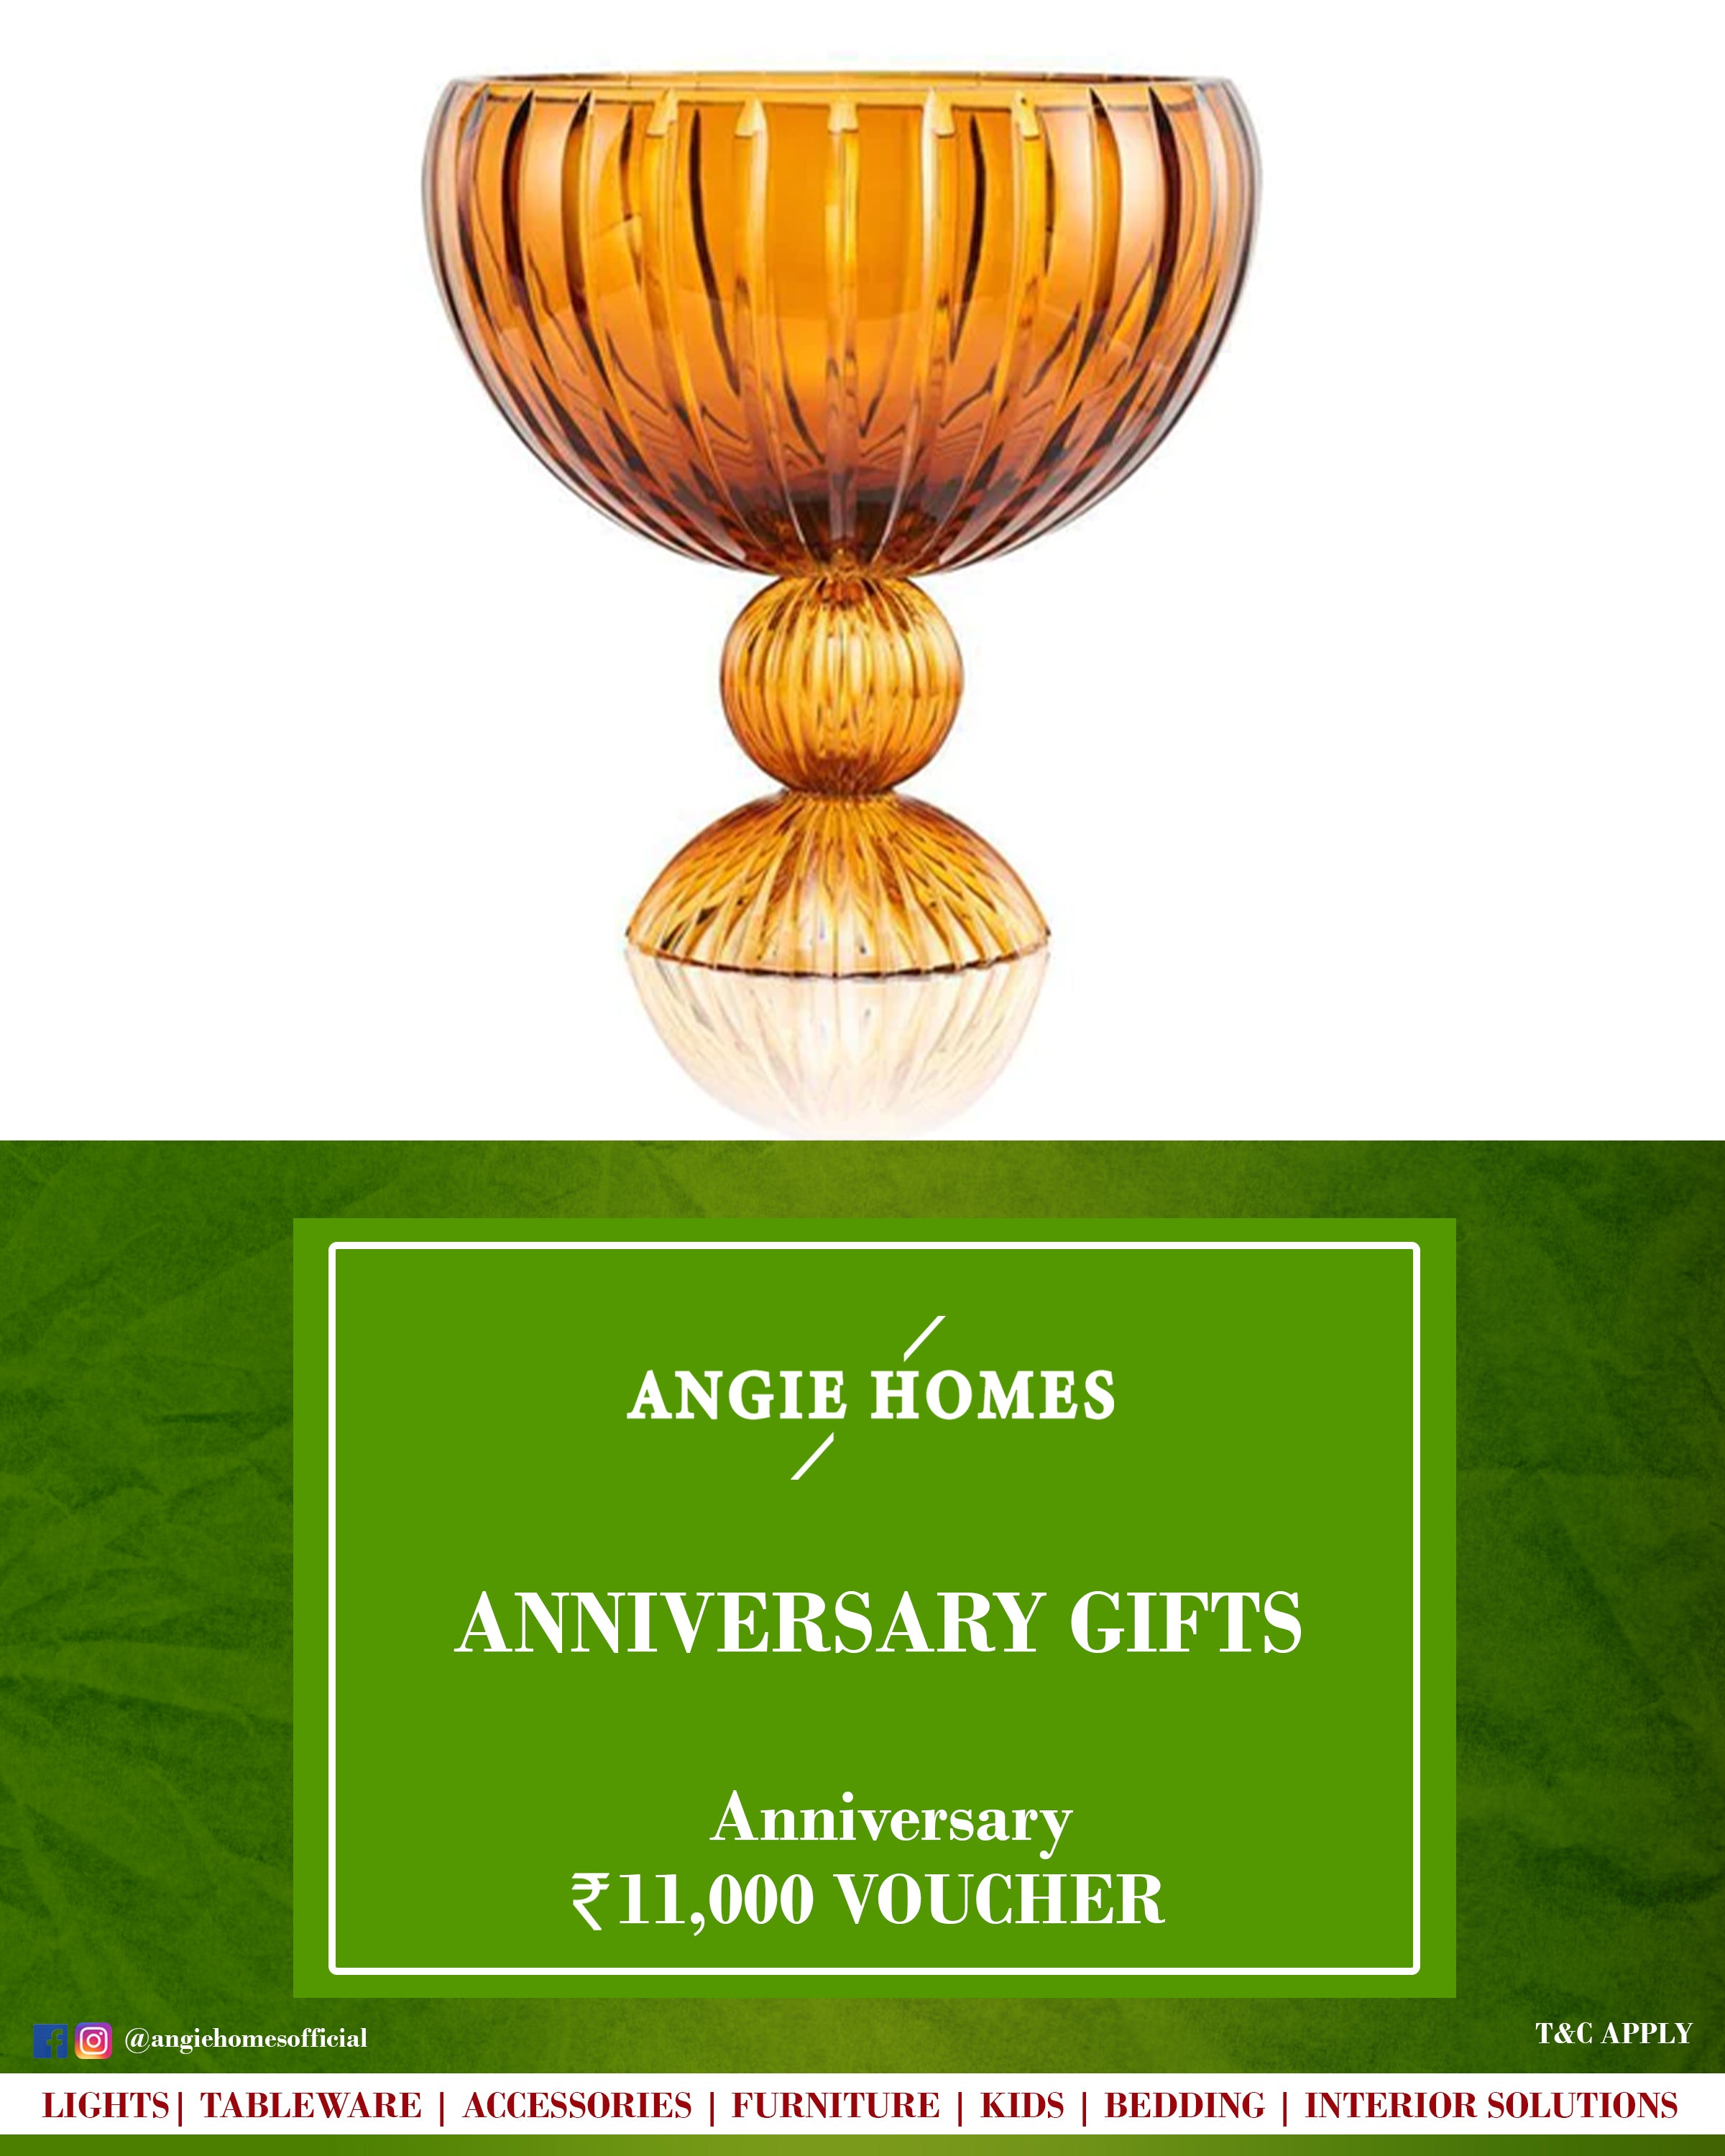 Beautiful Yellow Vases for Anniversary Gift Card Voucher - Angie Homes E-Gift Card